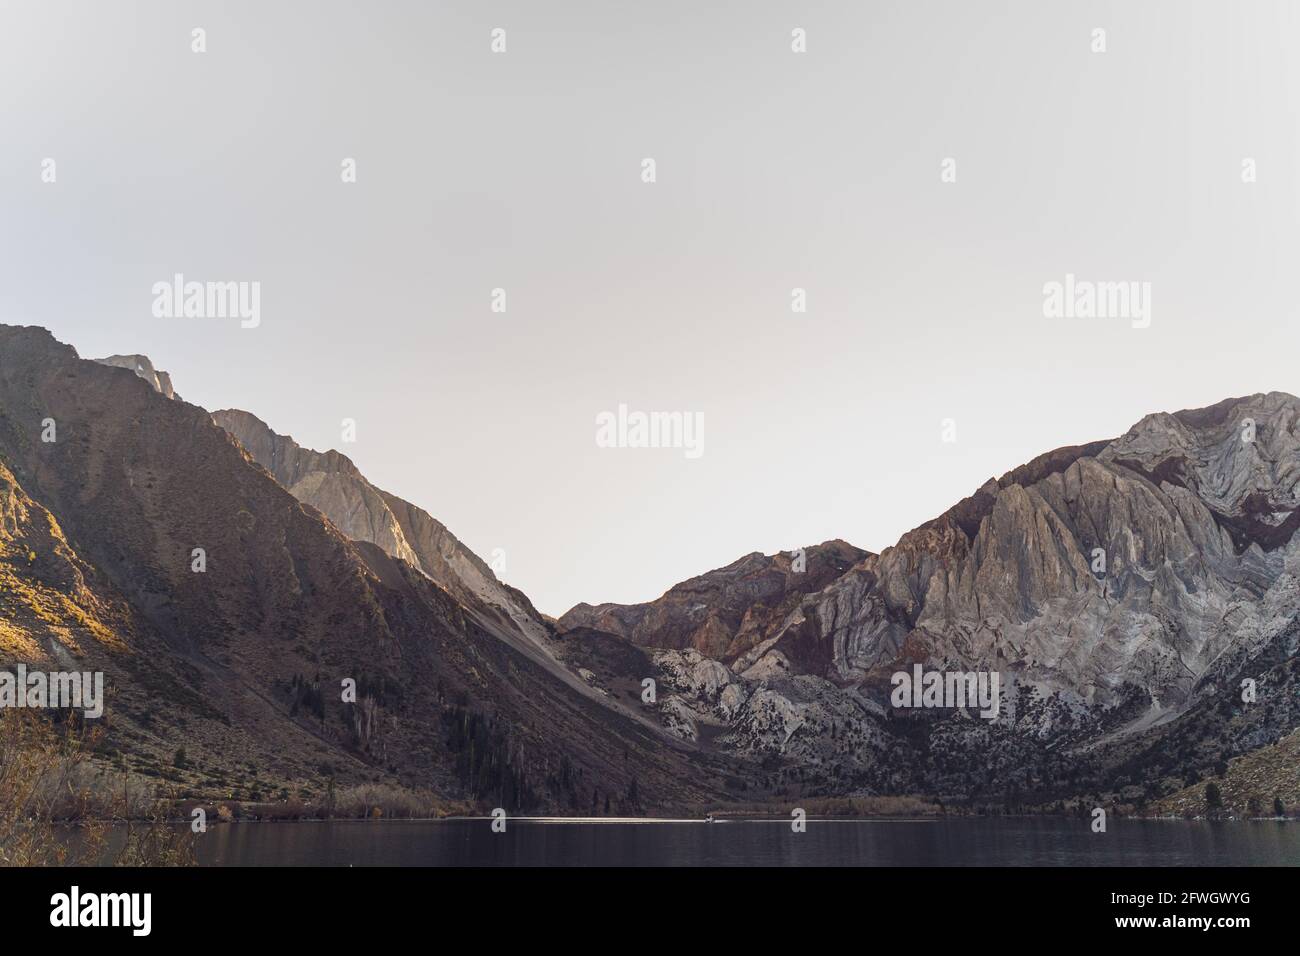 Convict Lake view of Sherwin range of Sierra Nevada Mountains on a clear day at sunset Stock Photo